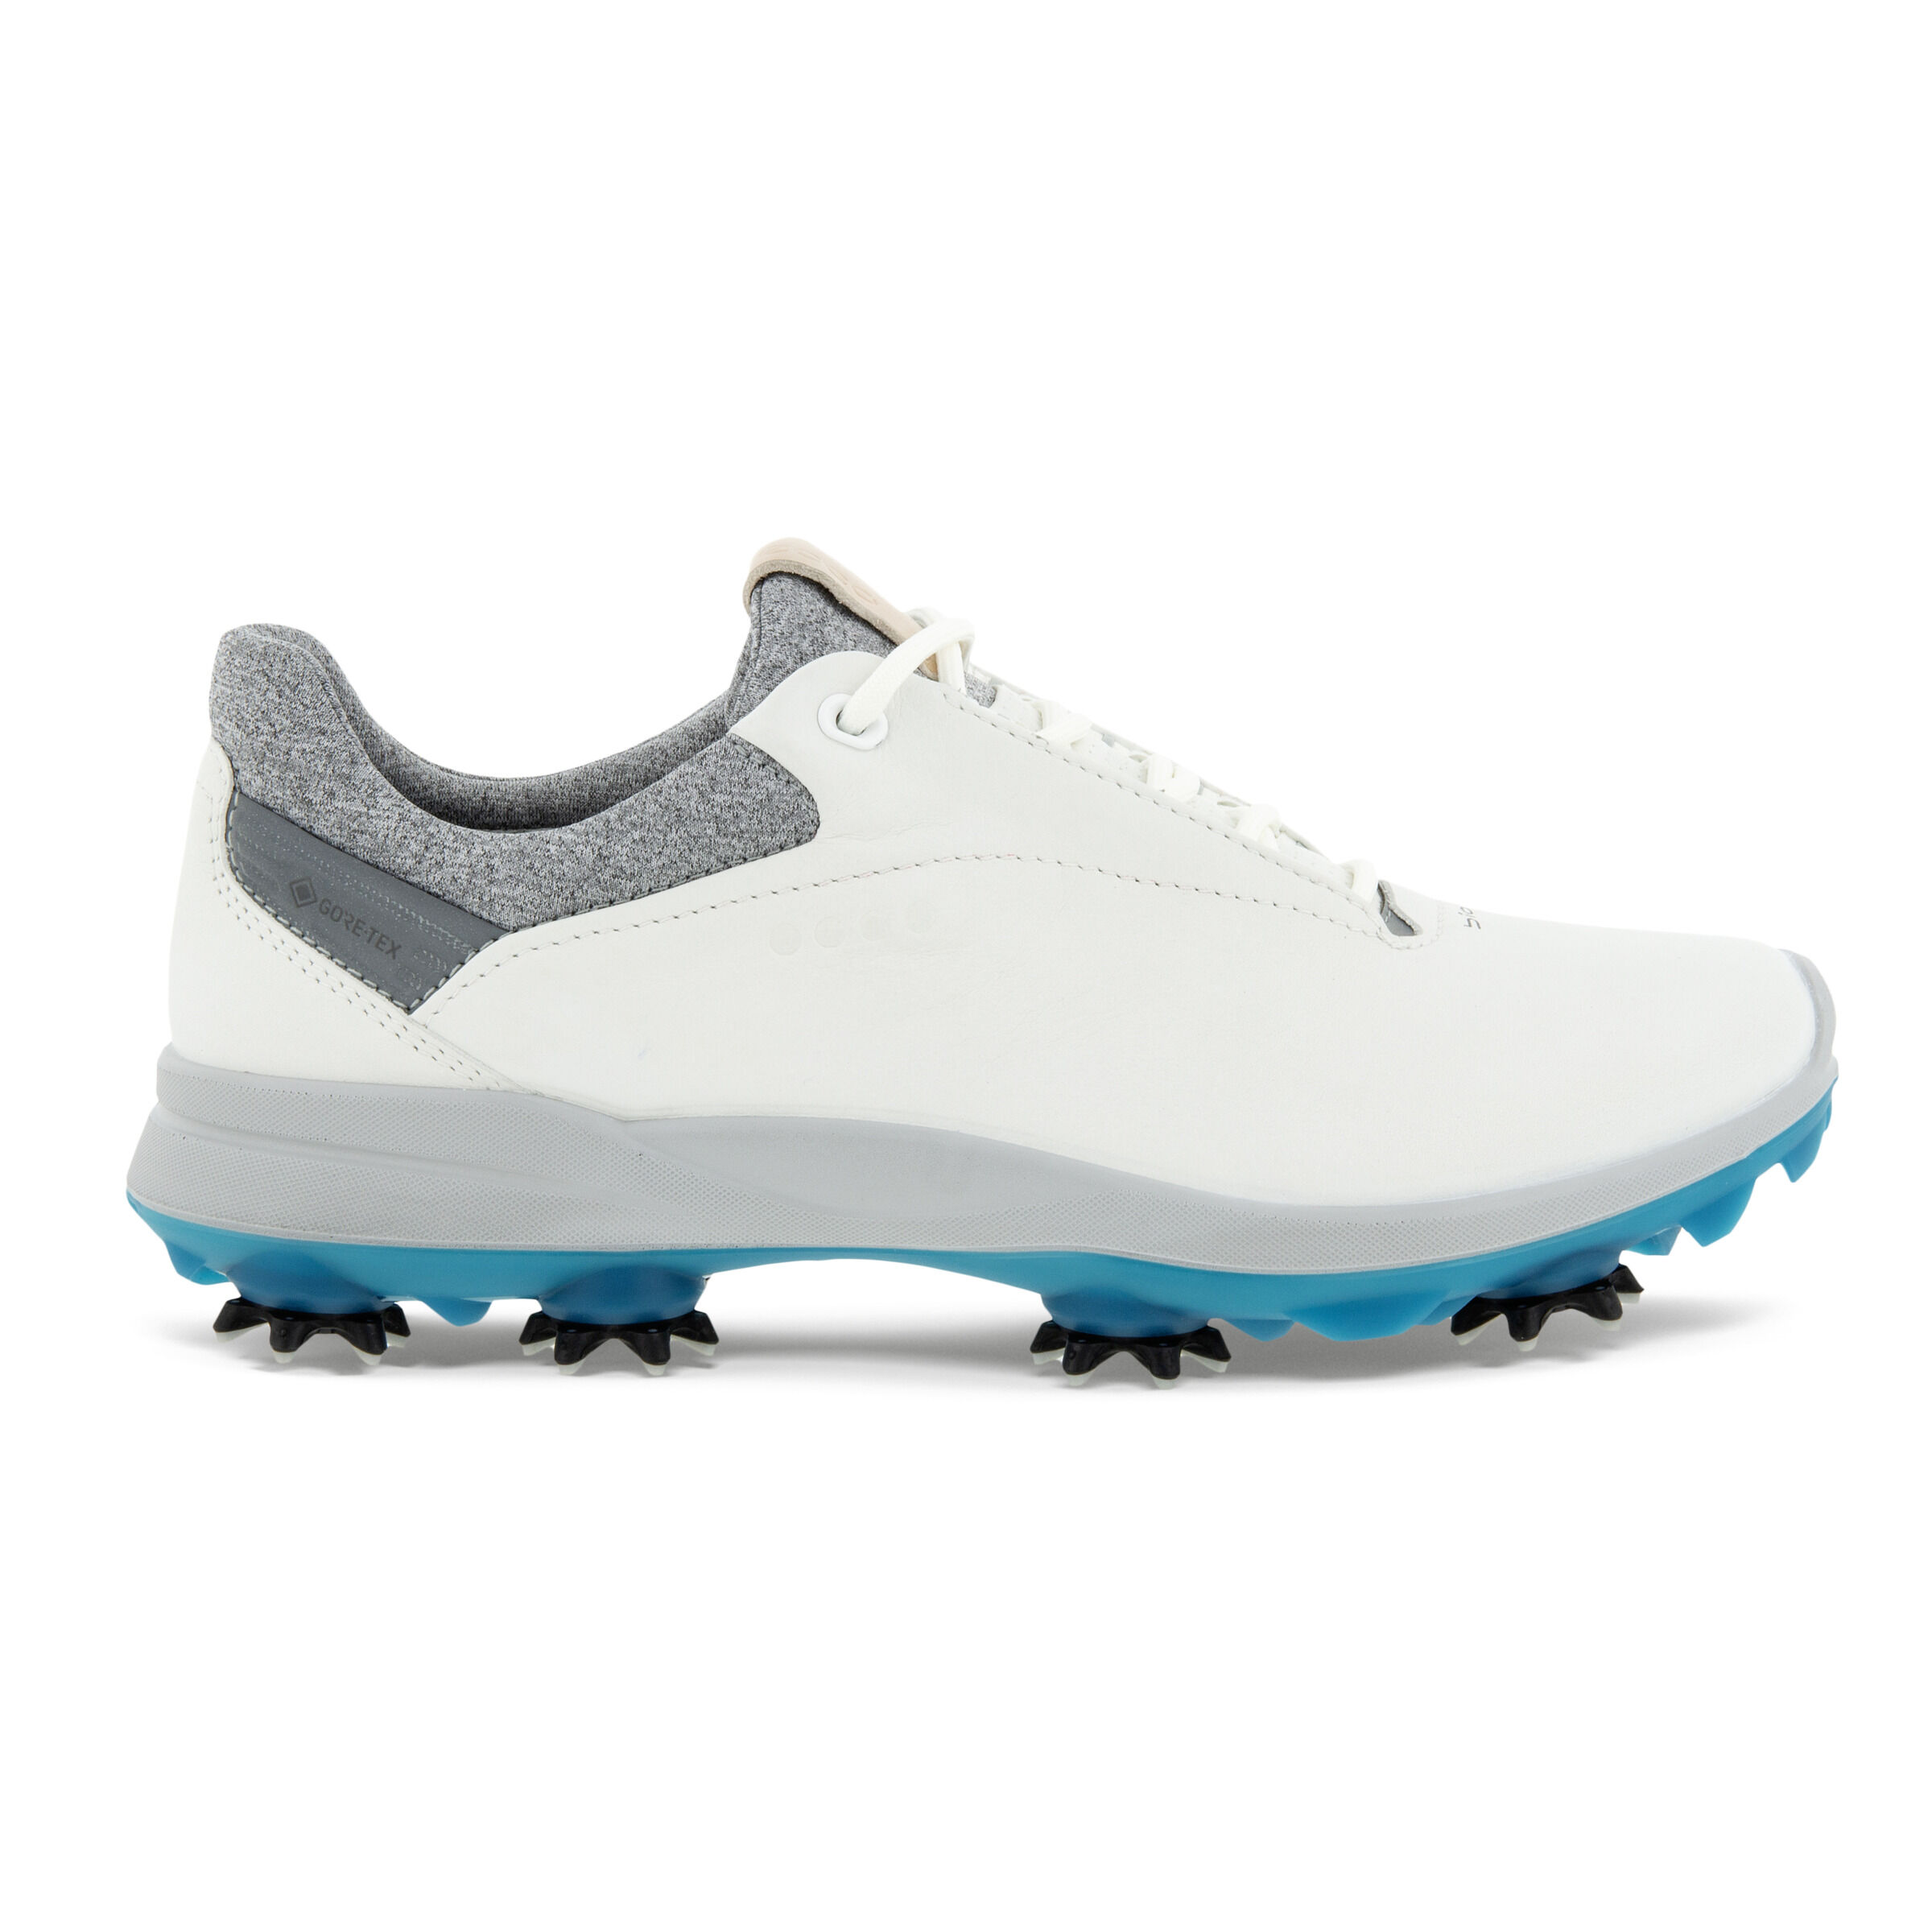 Women's BIOM G3 Golf Shoes | Official Store | ECCO® Shoes